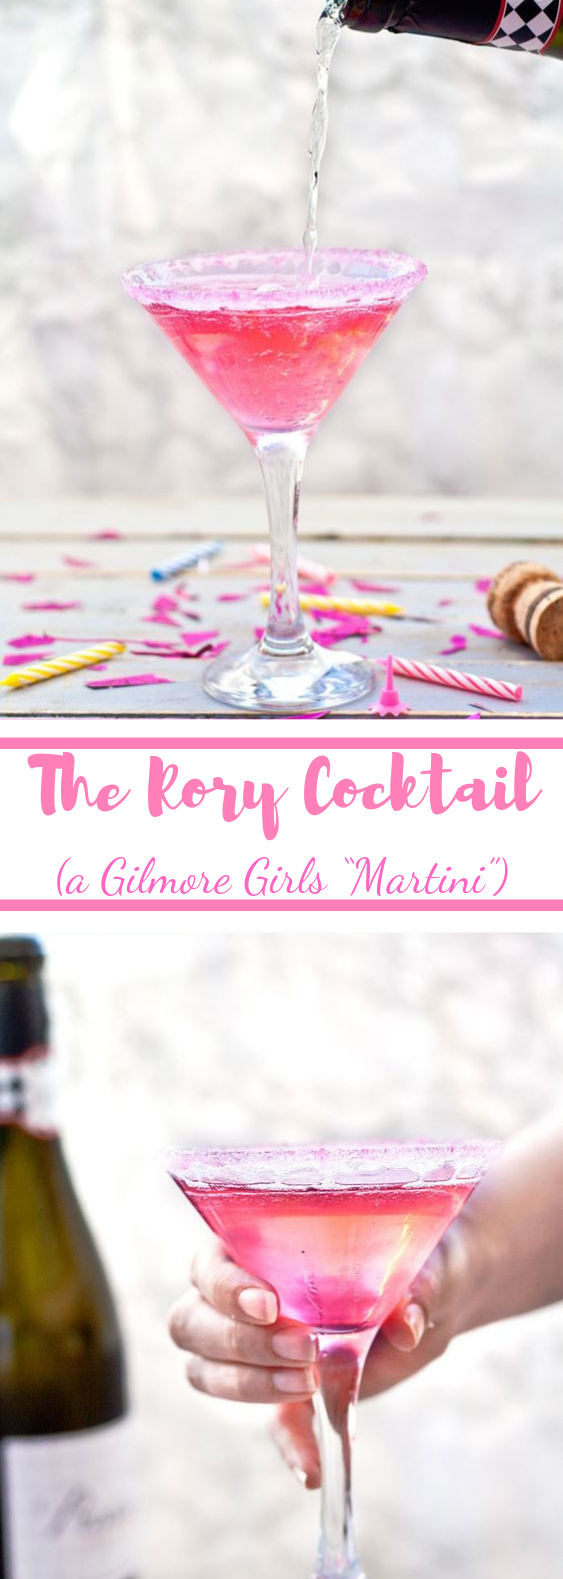 The Rory Cocktail (a Gilmore Girls “Martini”) #cocktail #drinks